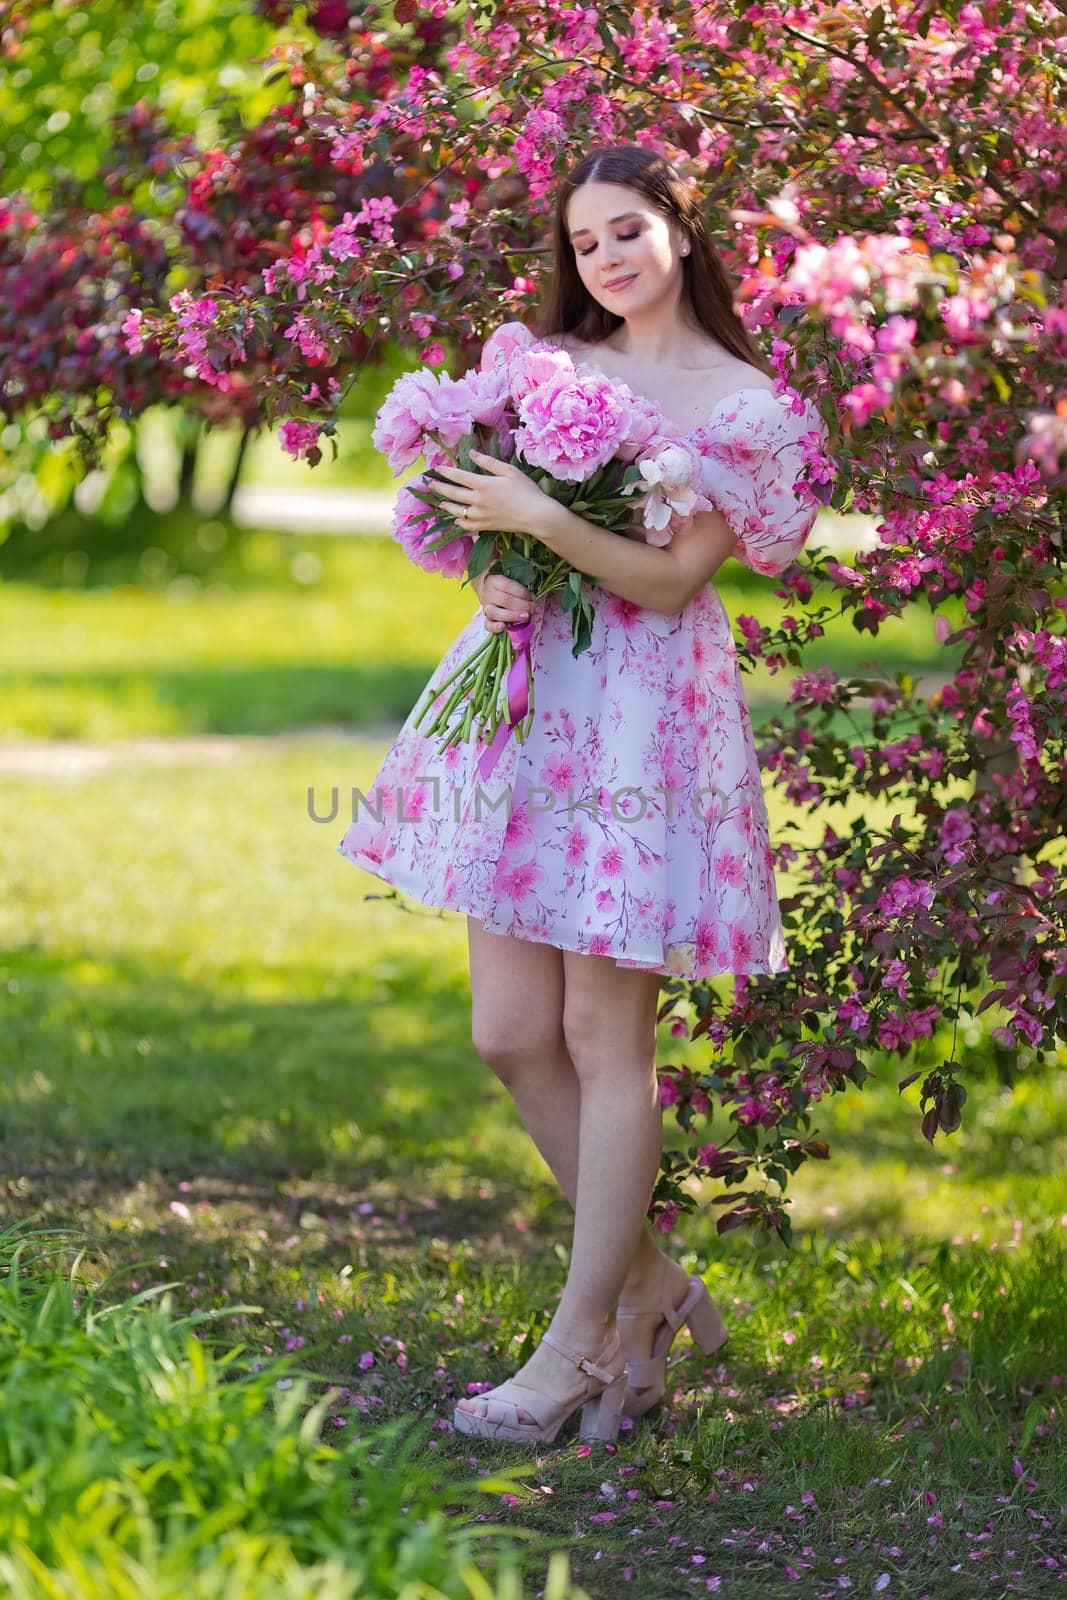 the girl, closed her eyes, stands with a large bouquet of peonies, near pink flowering trees in the garden, in spring on a sunny day. Copy space. Vertical